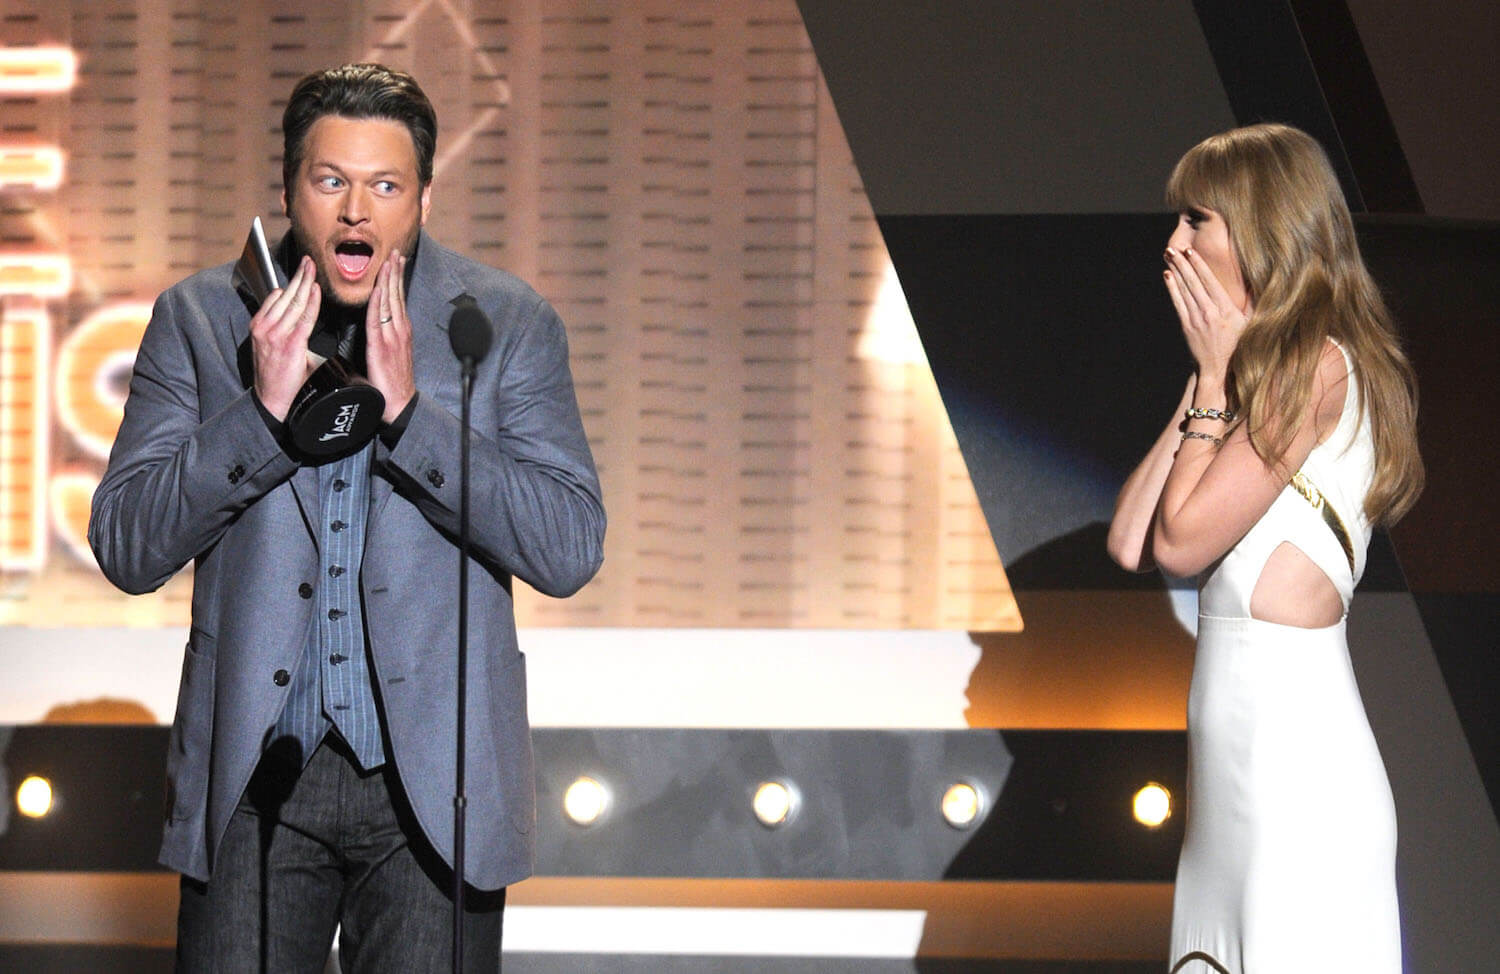 Blake Shelton holding his face in surprise while receiving an award from Taylor Swift, who also looks surprised, at the 47th Annual Academy of Country Music Awards in 2012